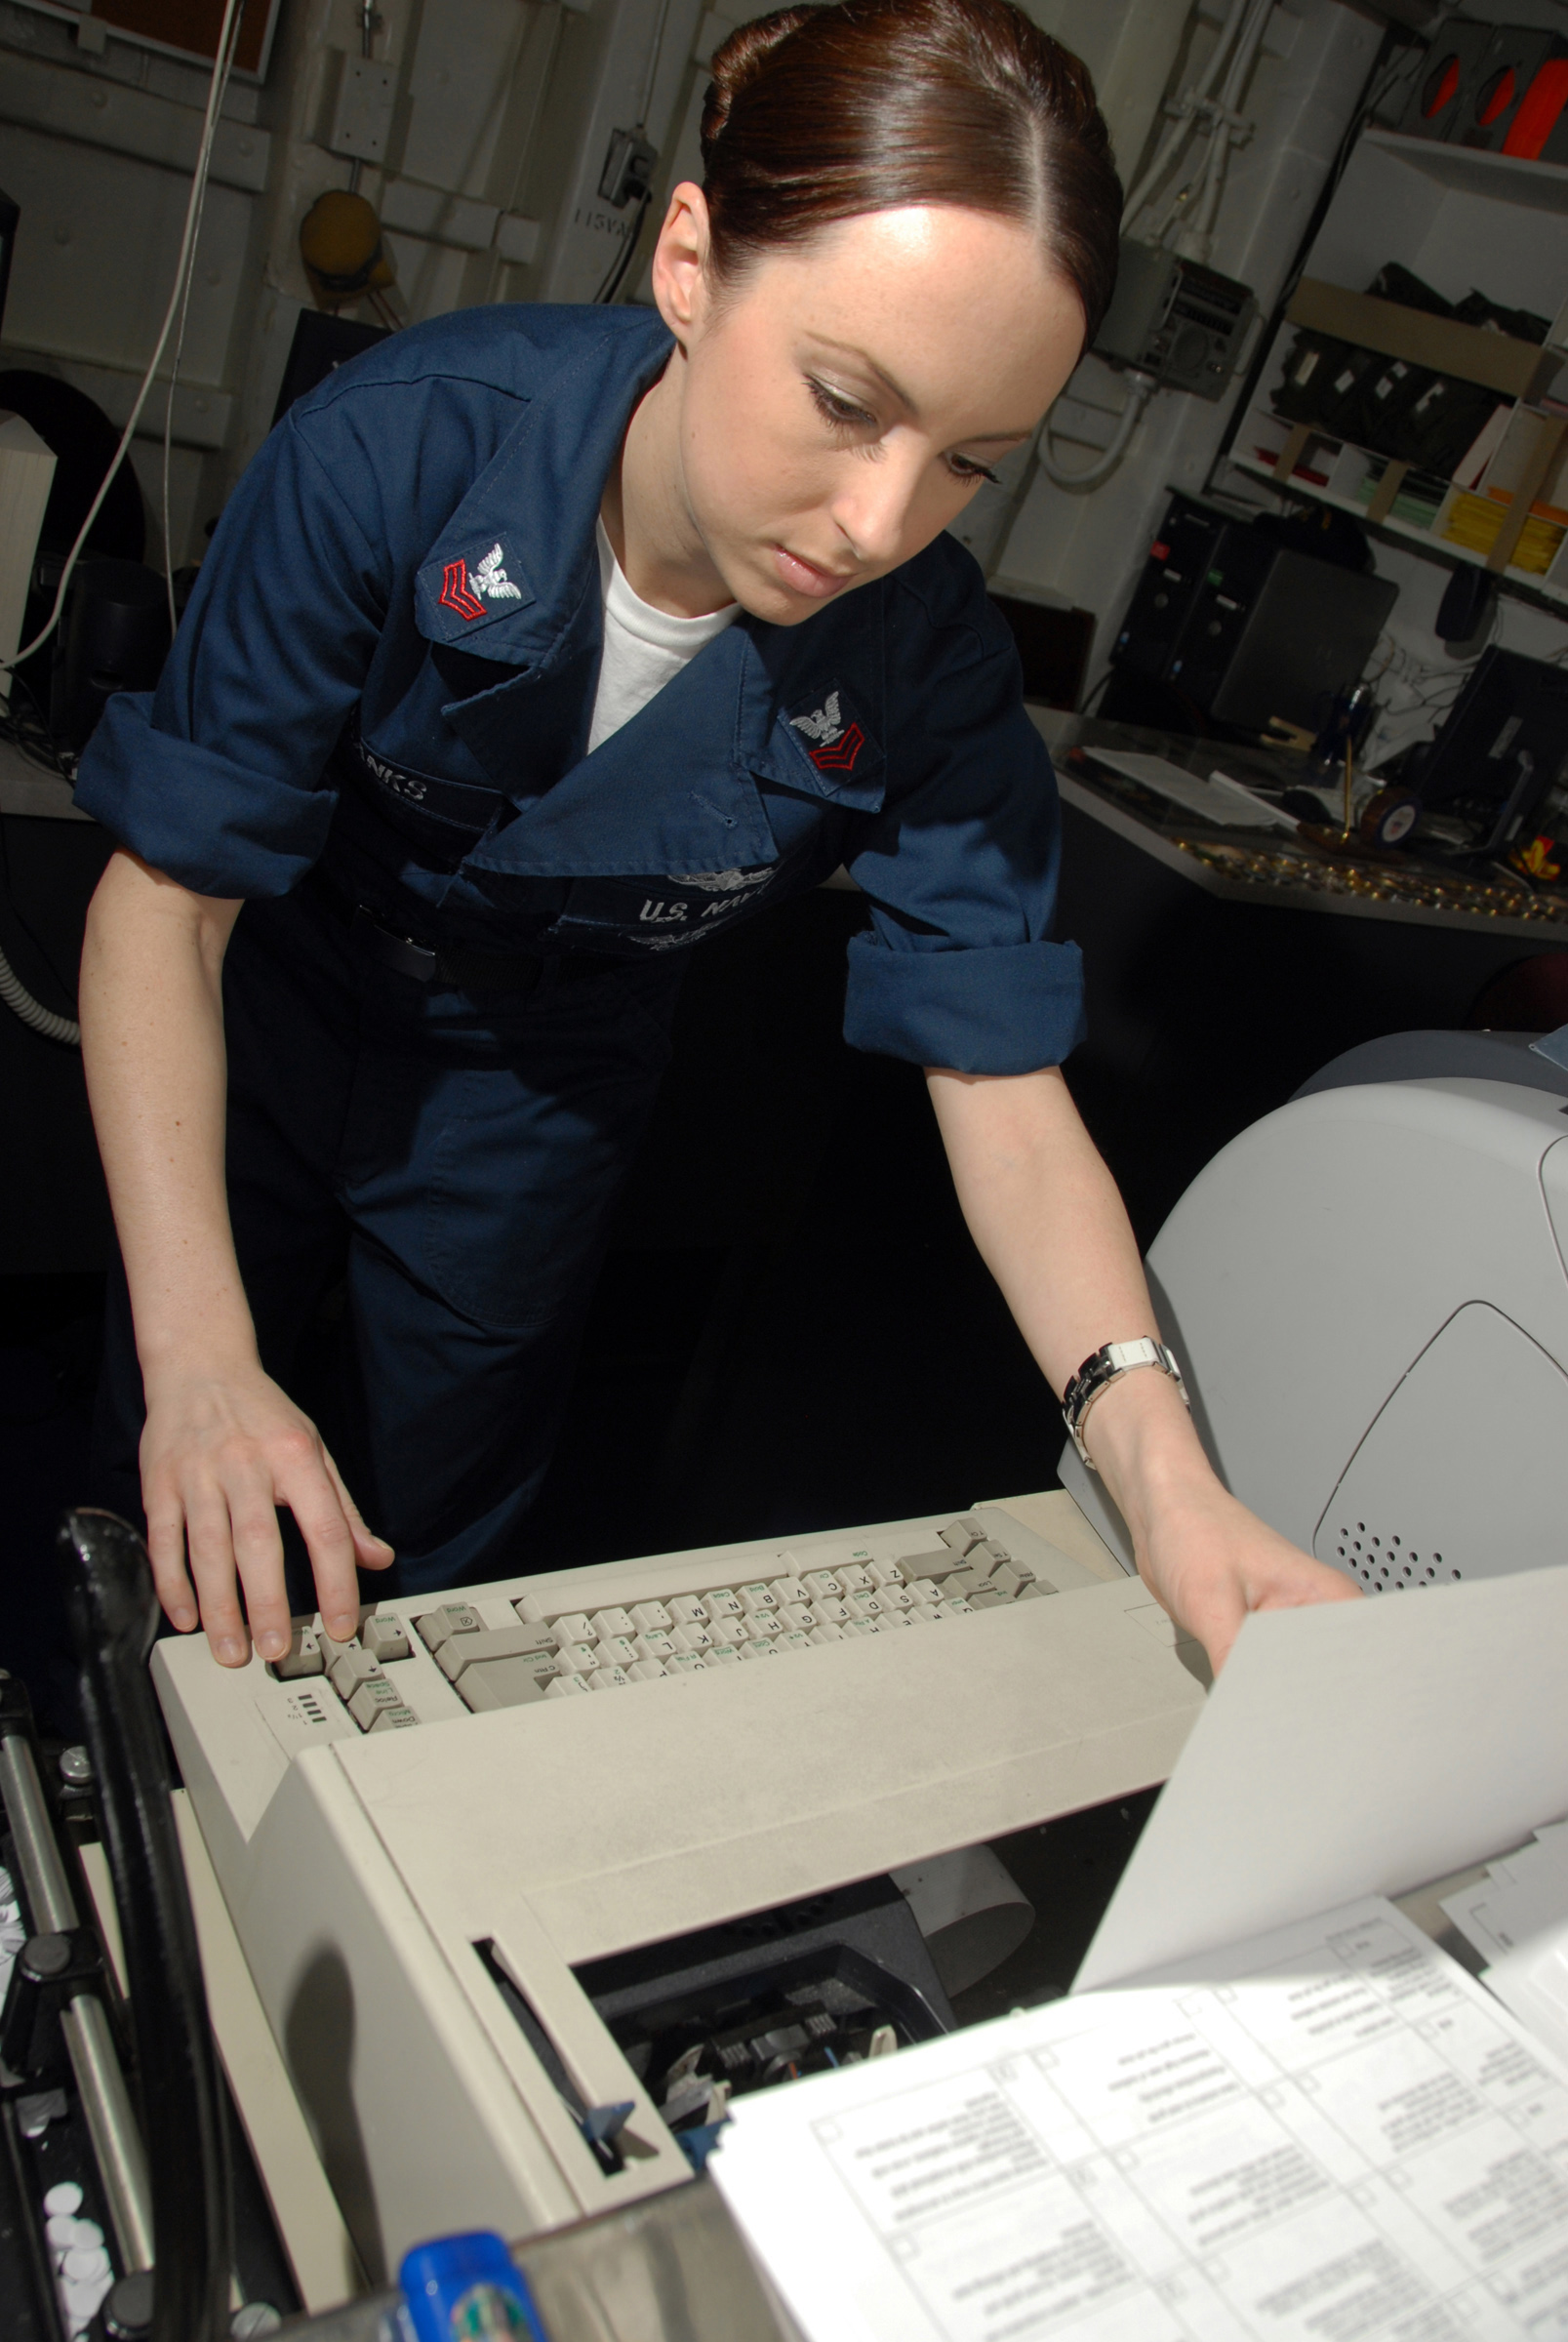 US Navy 080711-N-9450M-018 Yeoman 1st Class Julie Eubanks, of Rockwall, Texas, types an enclosure letter in the administrative office aboard the Nimitz-class aircraft carrier USS Abraham Lincoln (CVN 72)